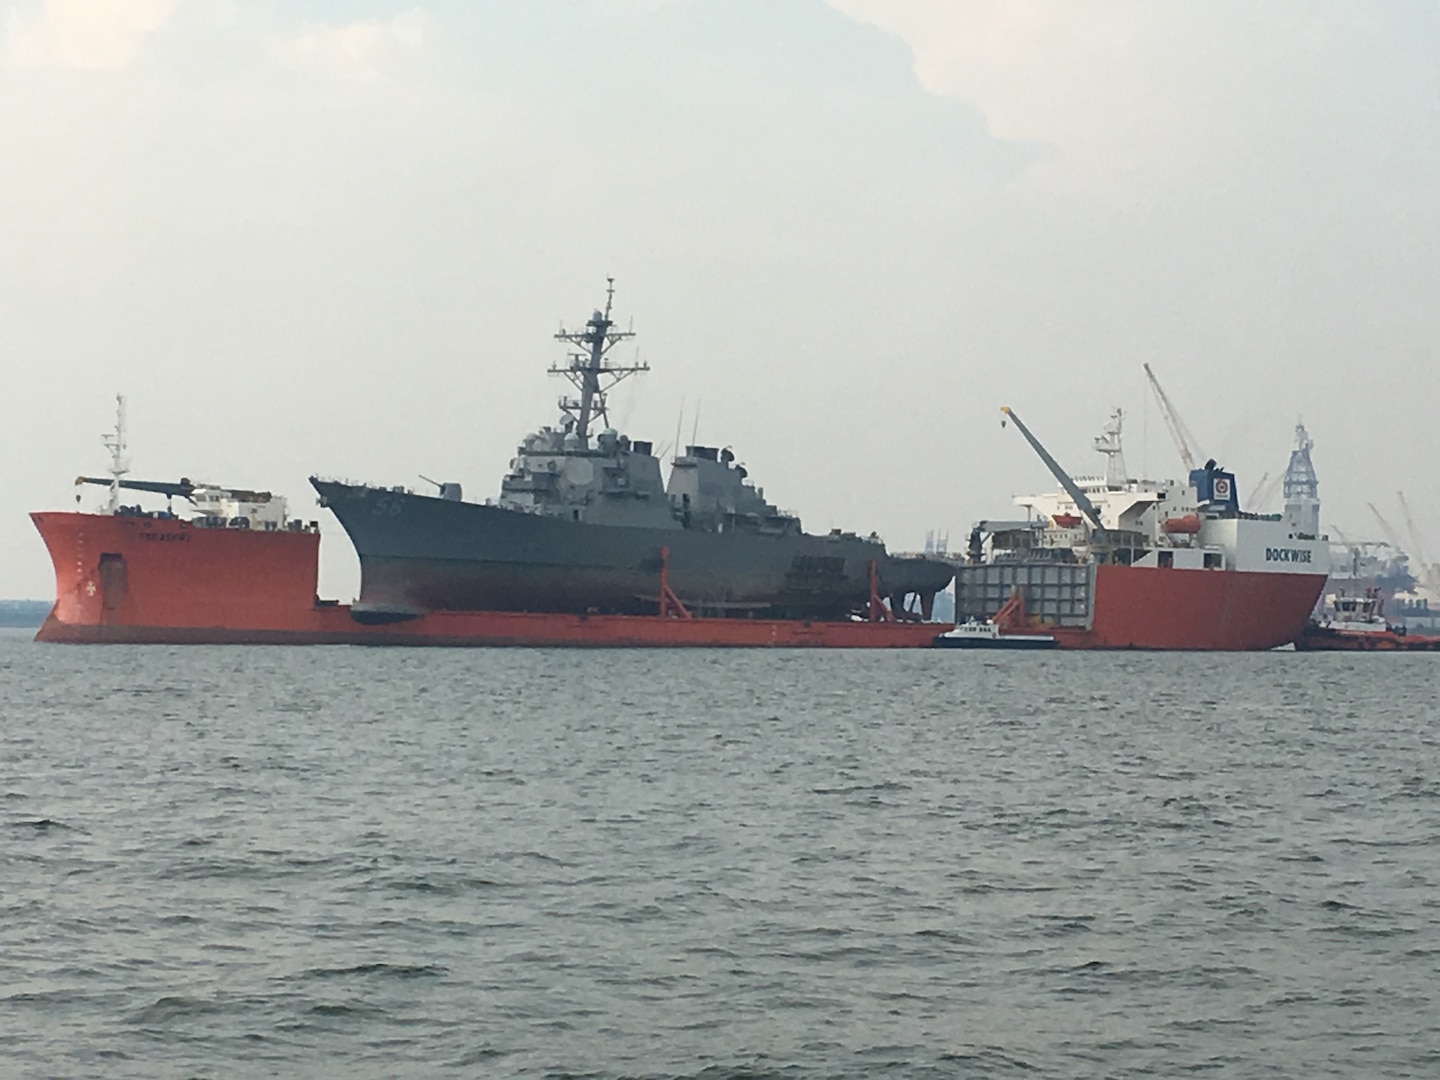 SINGAPORE – (Oct. 7, 2017) – MV Treasure concludes USS John S. McCain (DDG 56) heavy lift operations in the Singapore Strait, Oct. 7. U.S. Navy Supervisor of Salvage and Diving representatives prepared the destroyer for transit to Yokosuka, Japan, later this month.